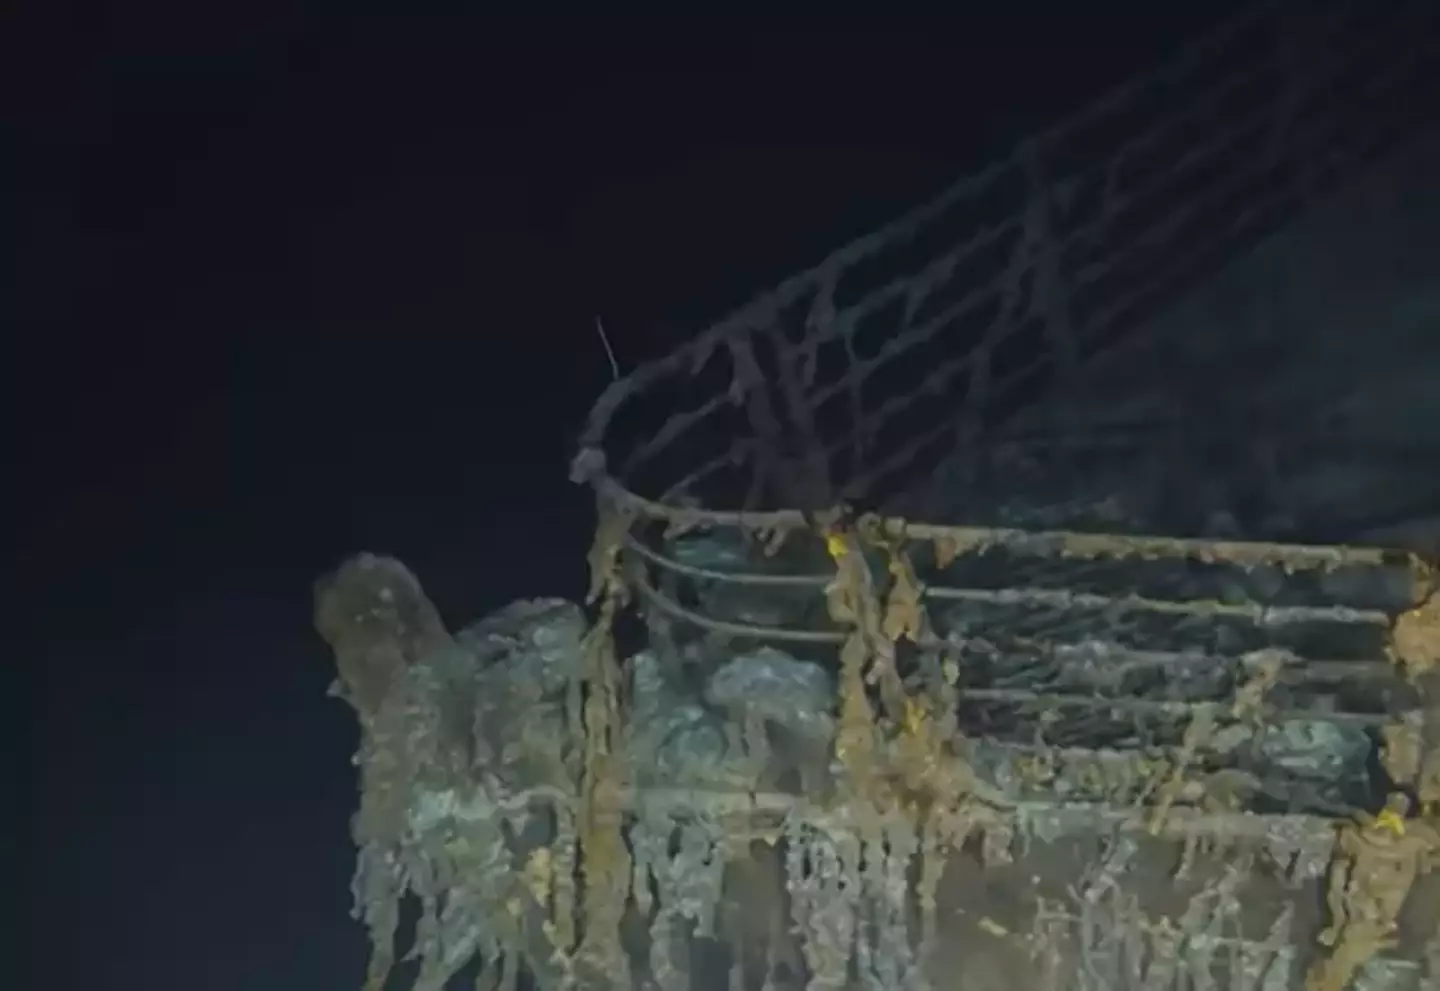 The bow of the Titanic didn't implode and is relatively intact on the ocean floor, the stern of the ship did and suffered far more damage.